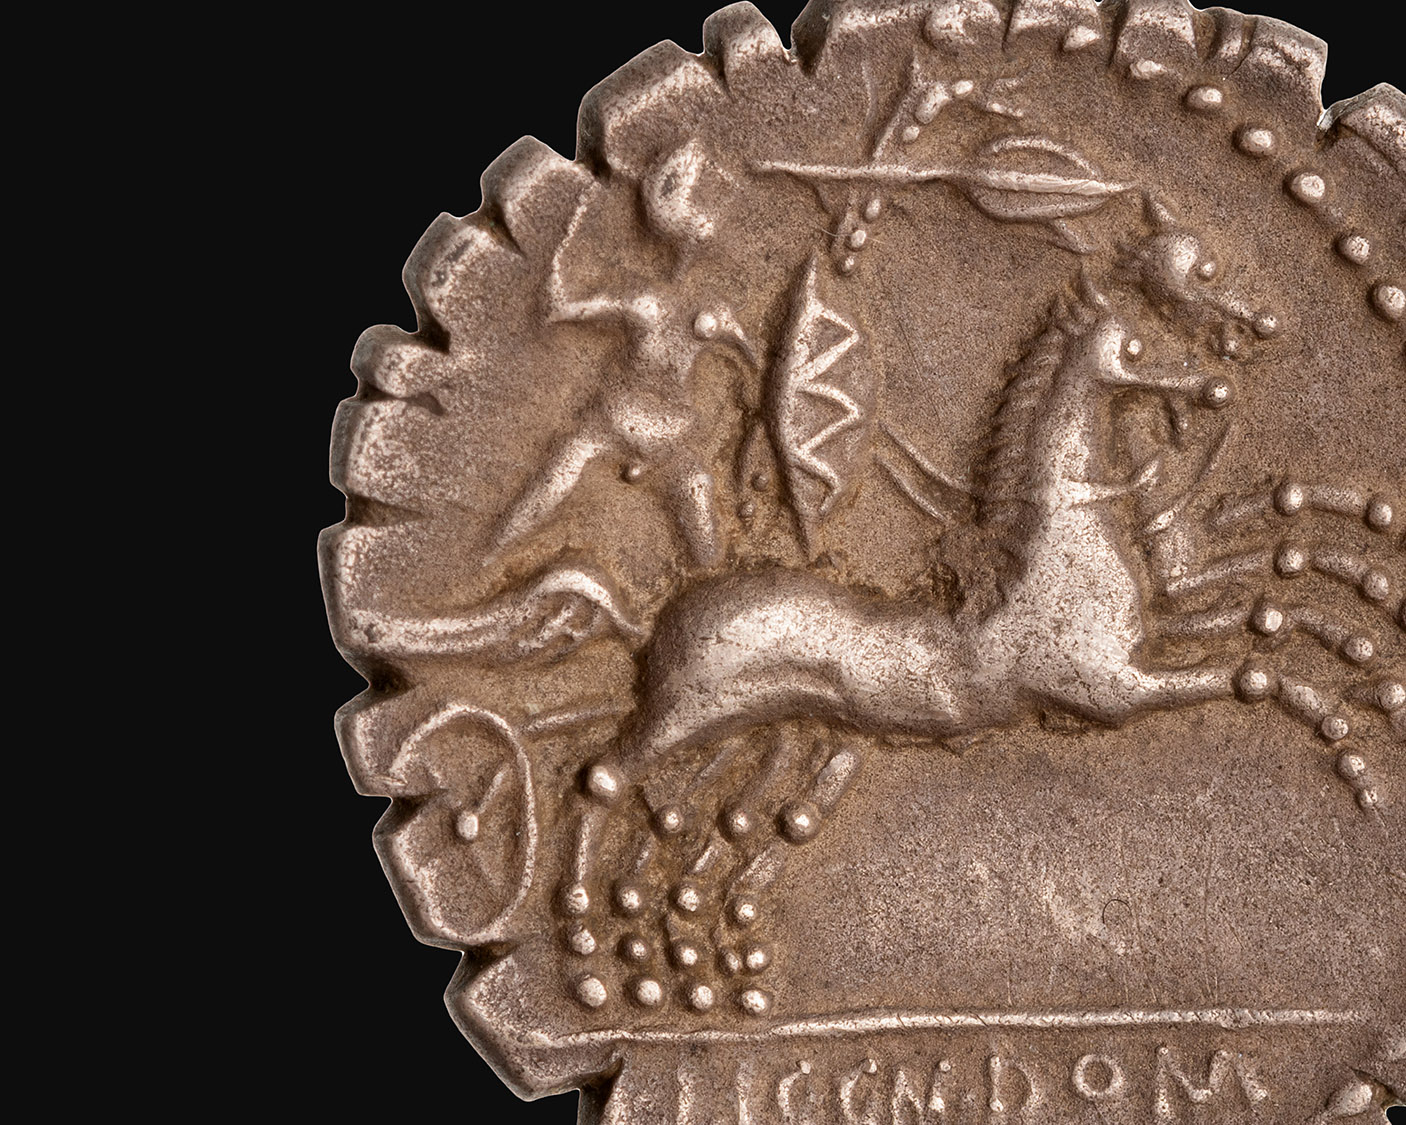 Long Table 153. The Gallic Connection: Roman Coinage, Silver Bullion,...